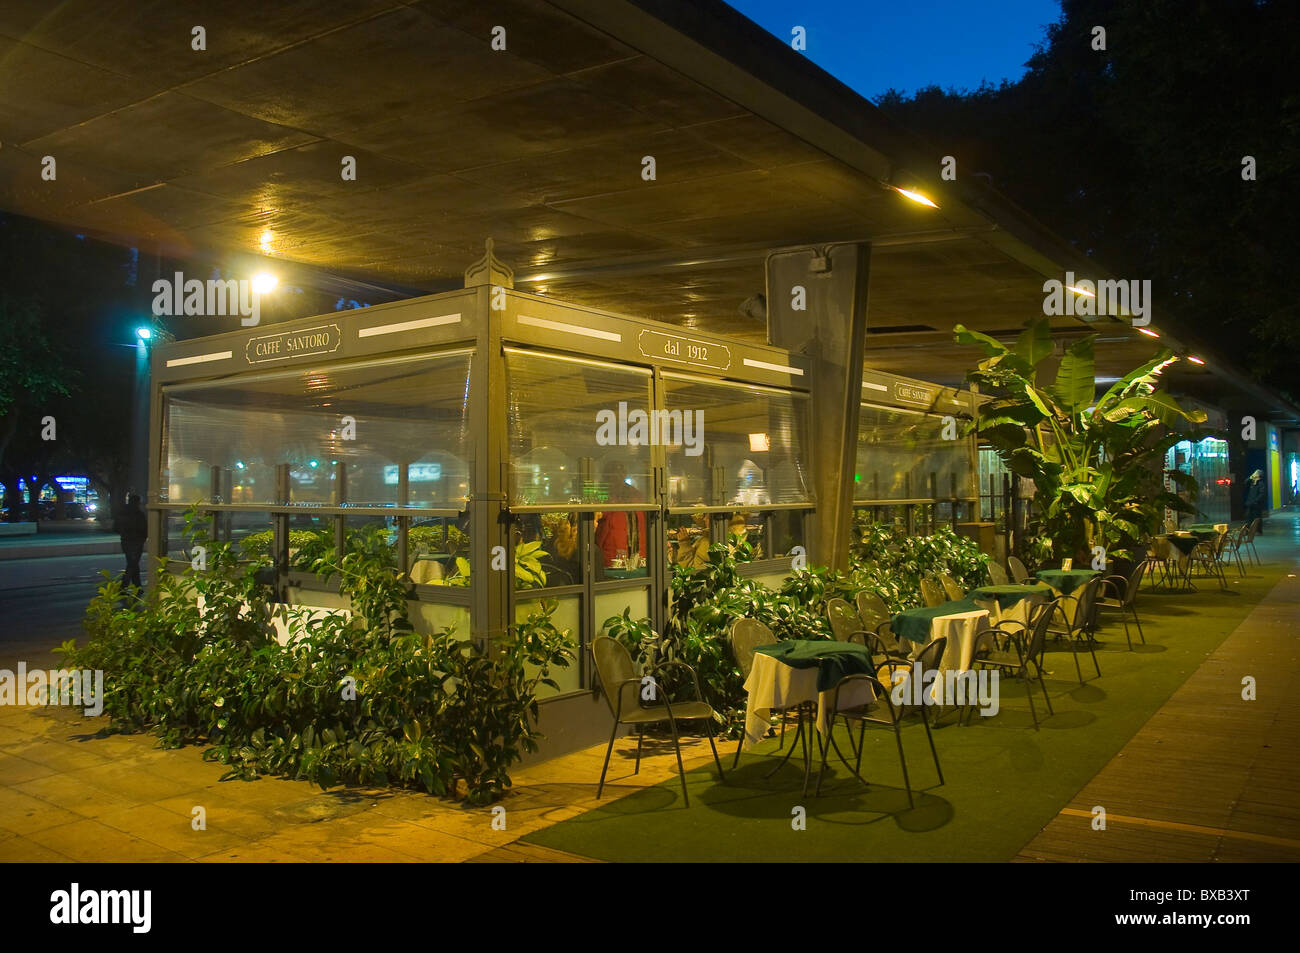 Cafe sicilia hi-res stock photography and images - Alamy